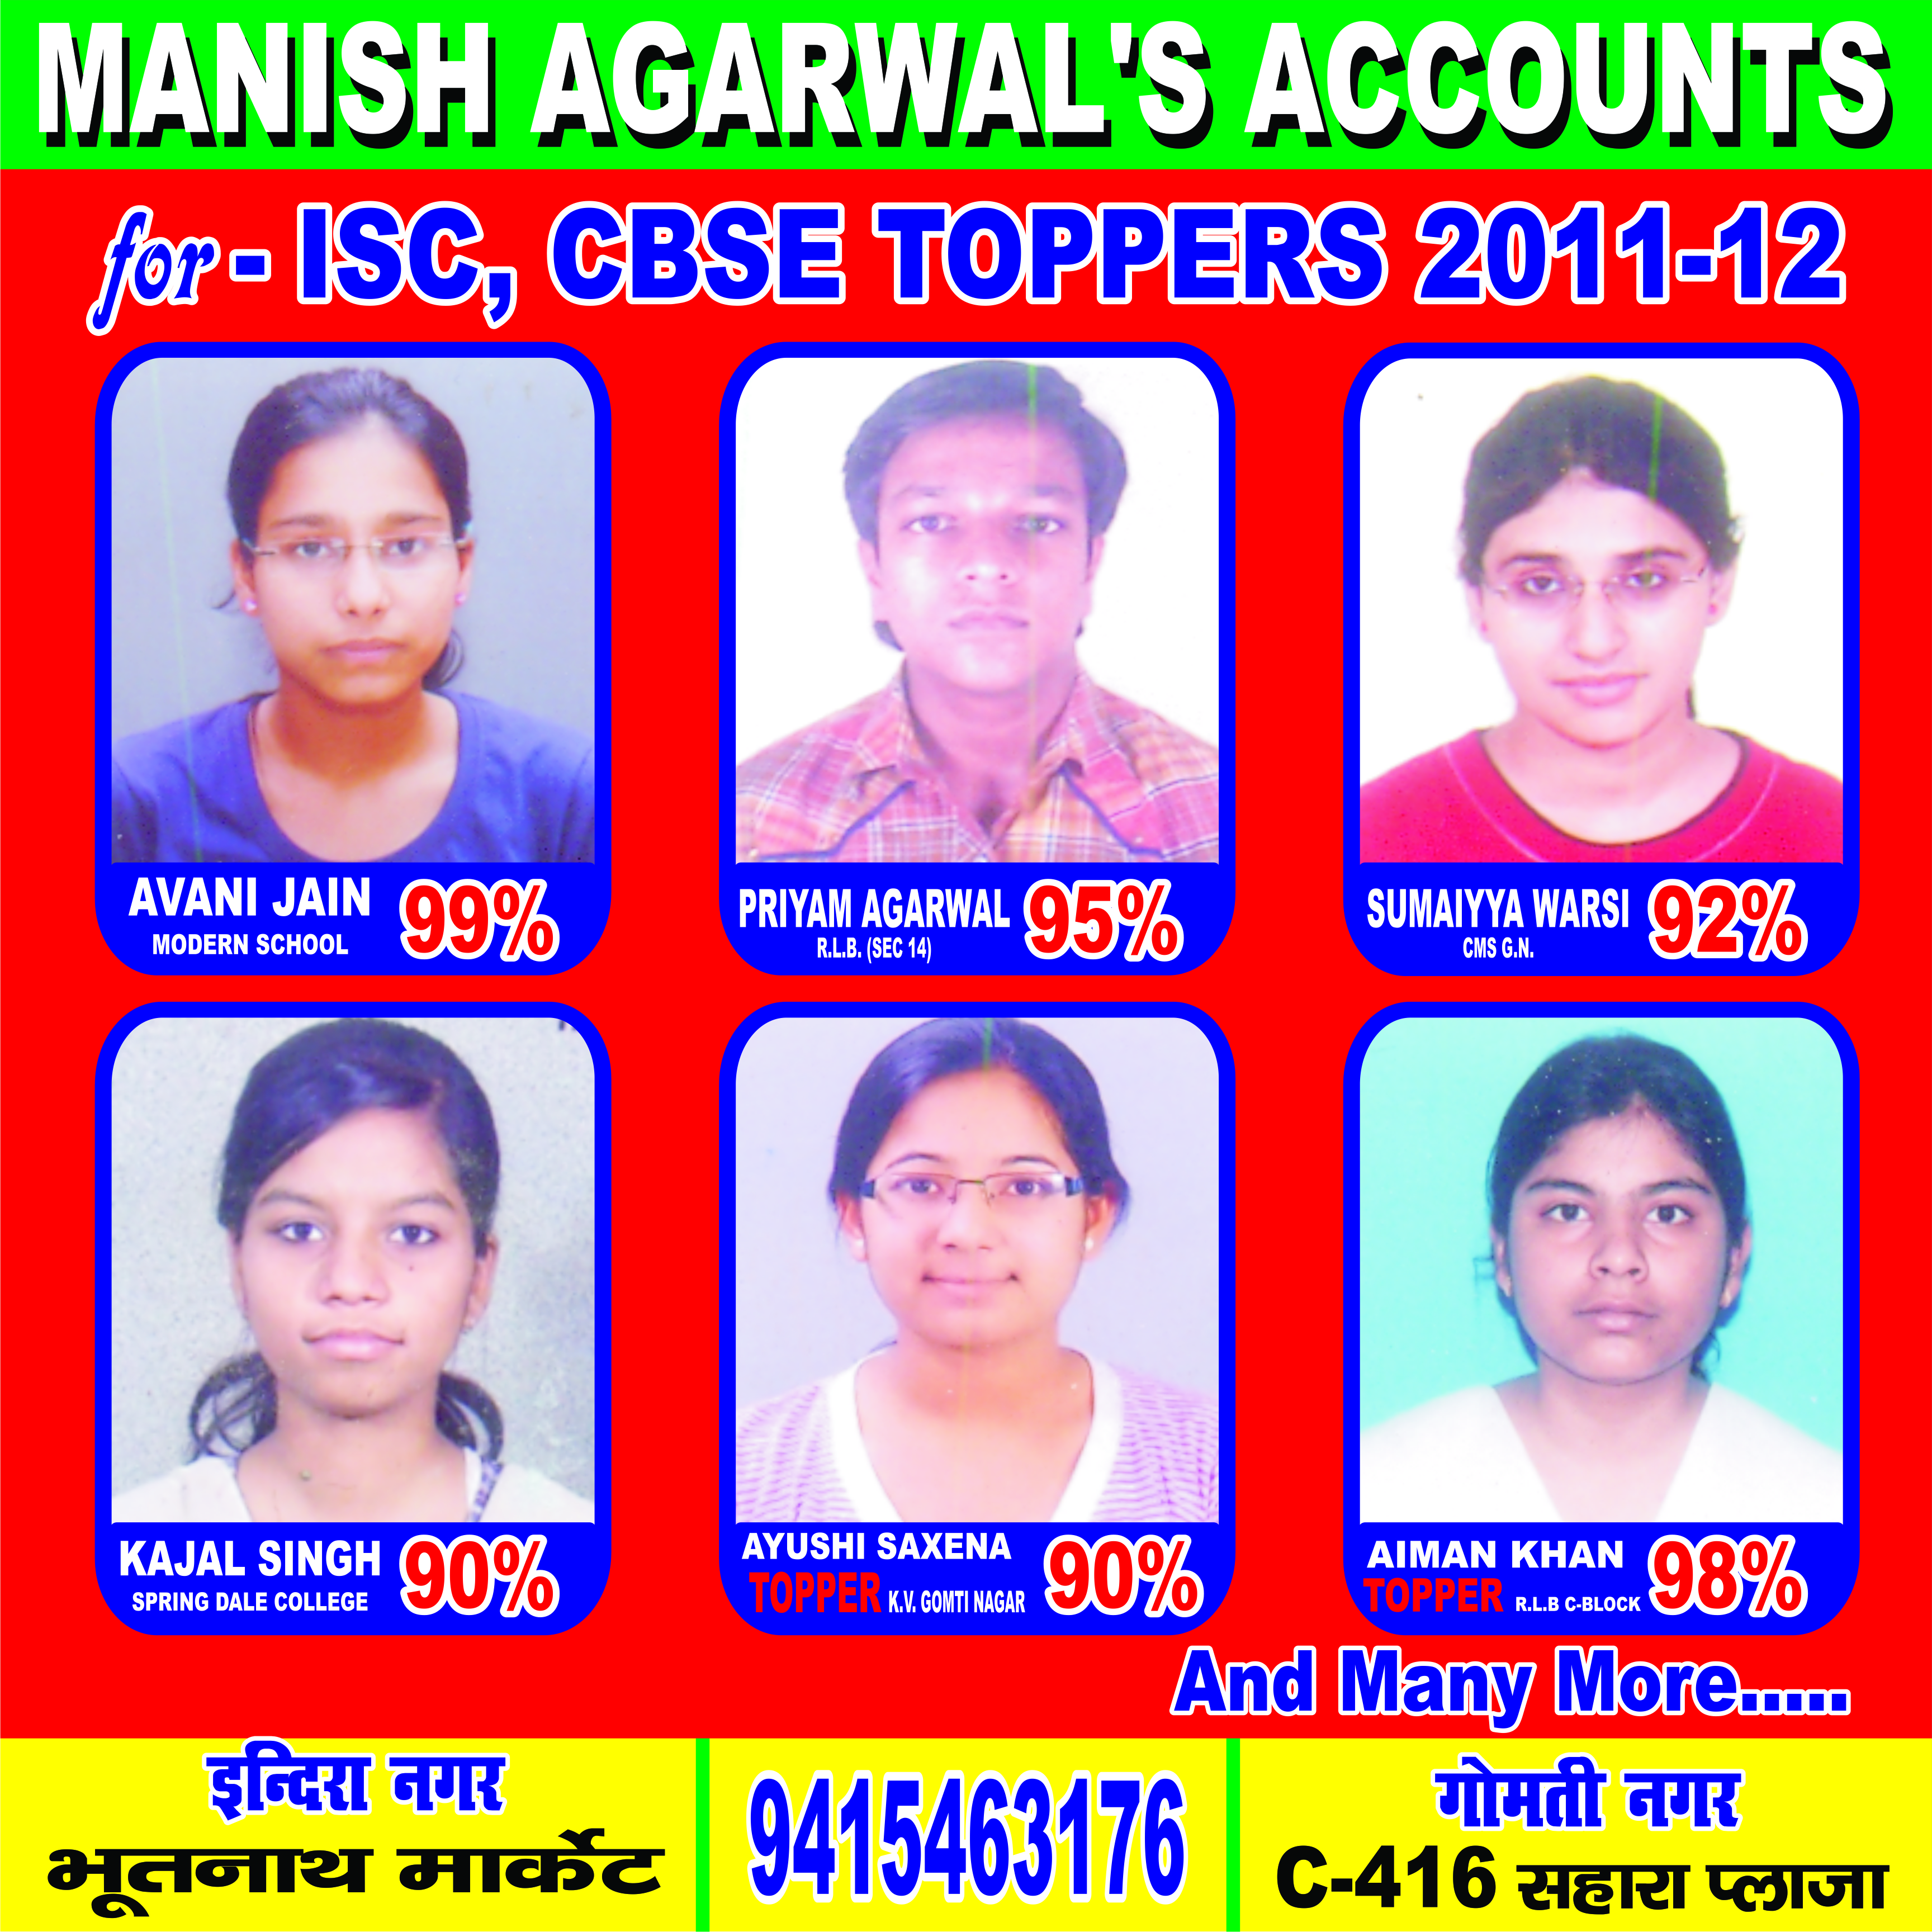 Toppers of ISC & CBSE 2011- 12